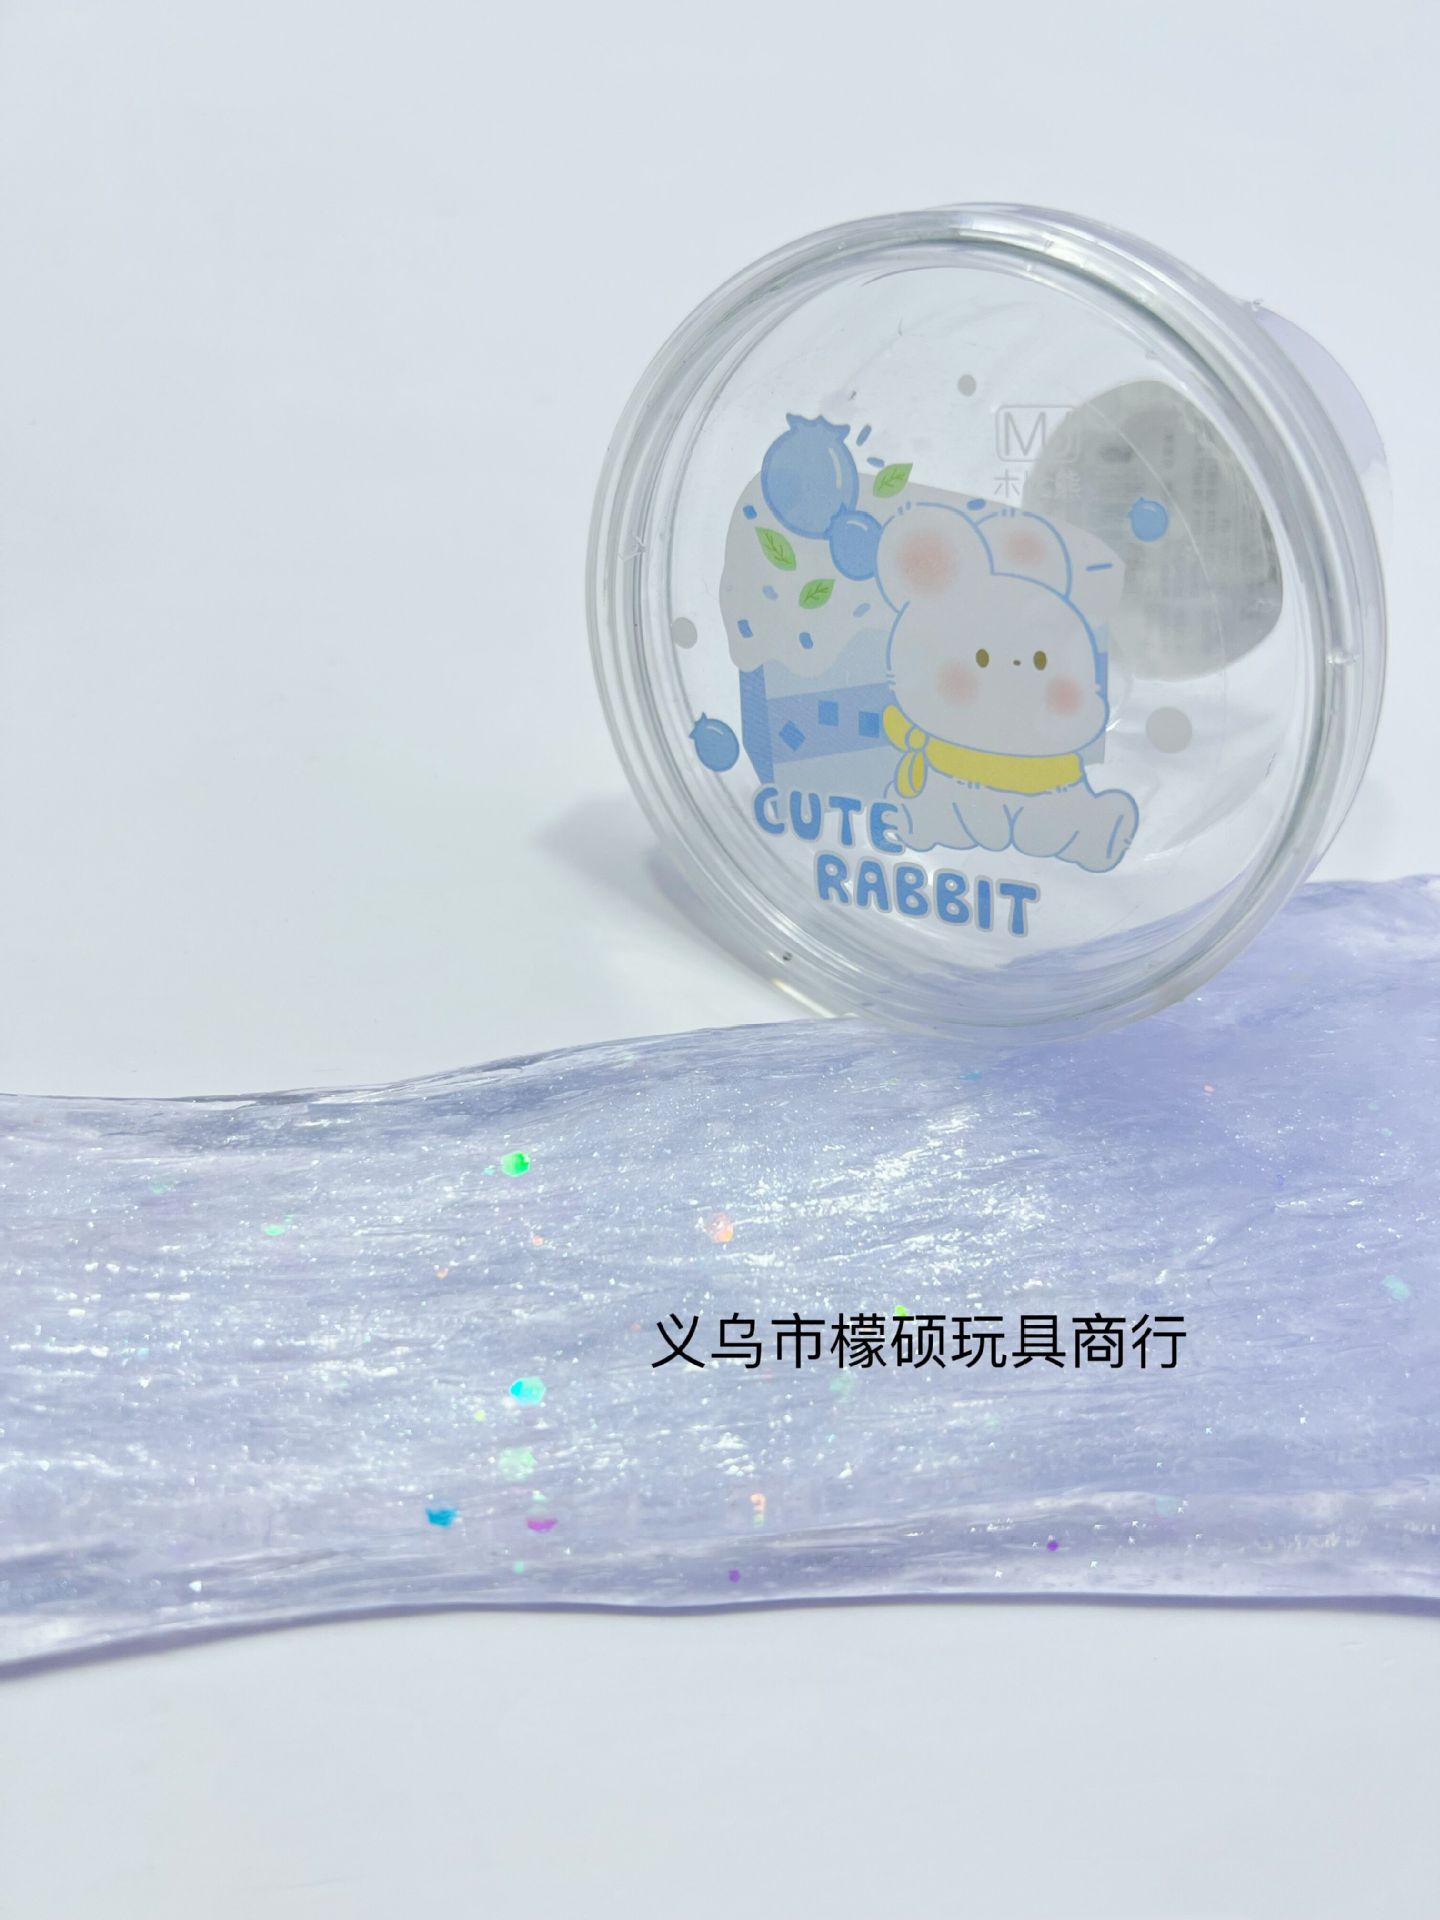 M Sweetheart Rabbit Foaming Glue Has Good Tensile Property Three Certificates Complete Rest Assured to Play Slim Fun High Transparency Crystal Mud